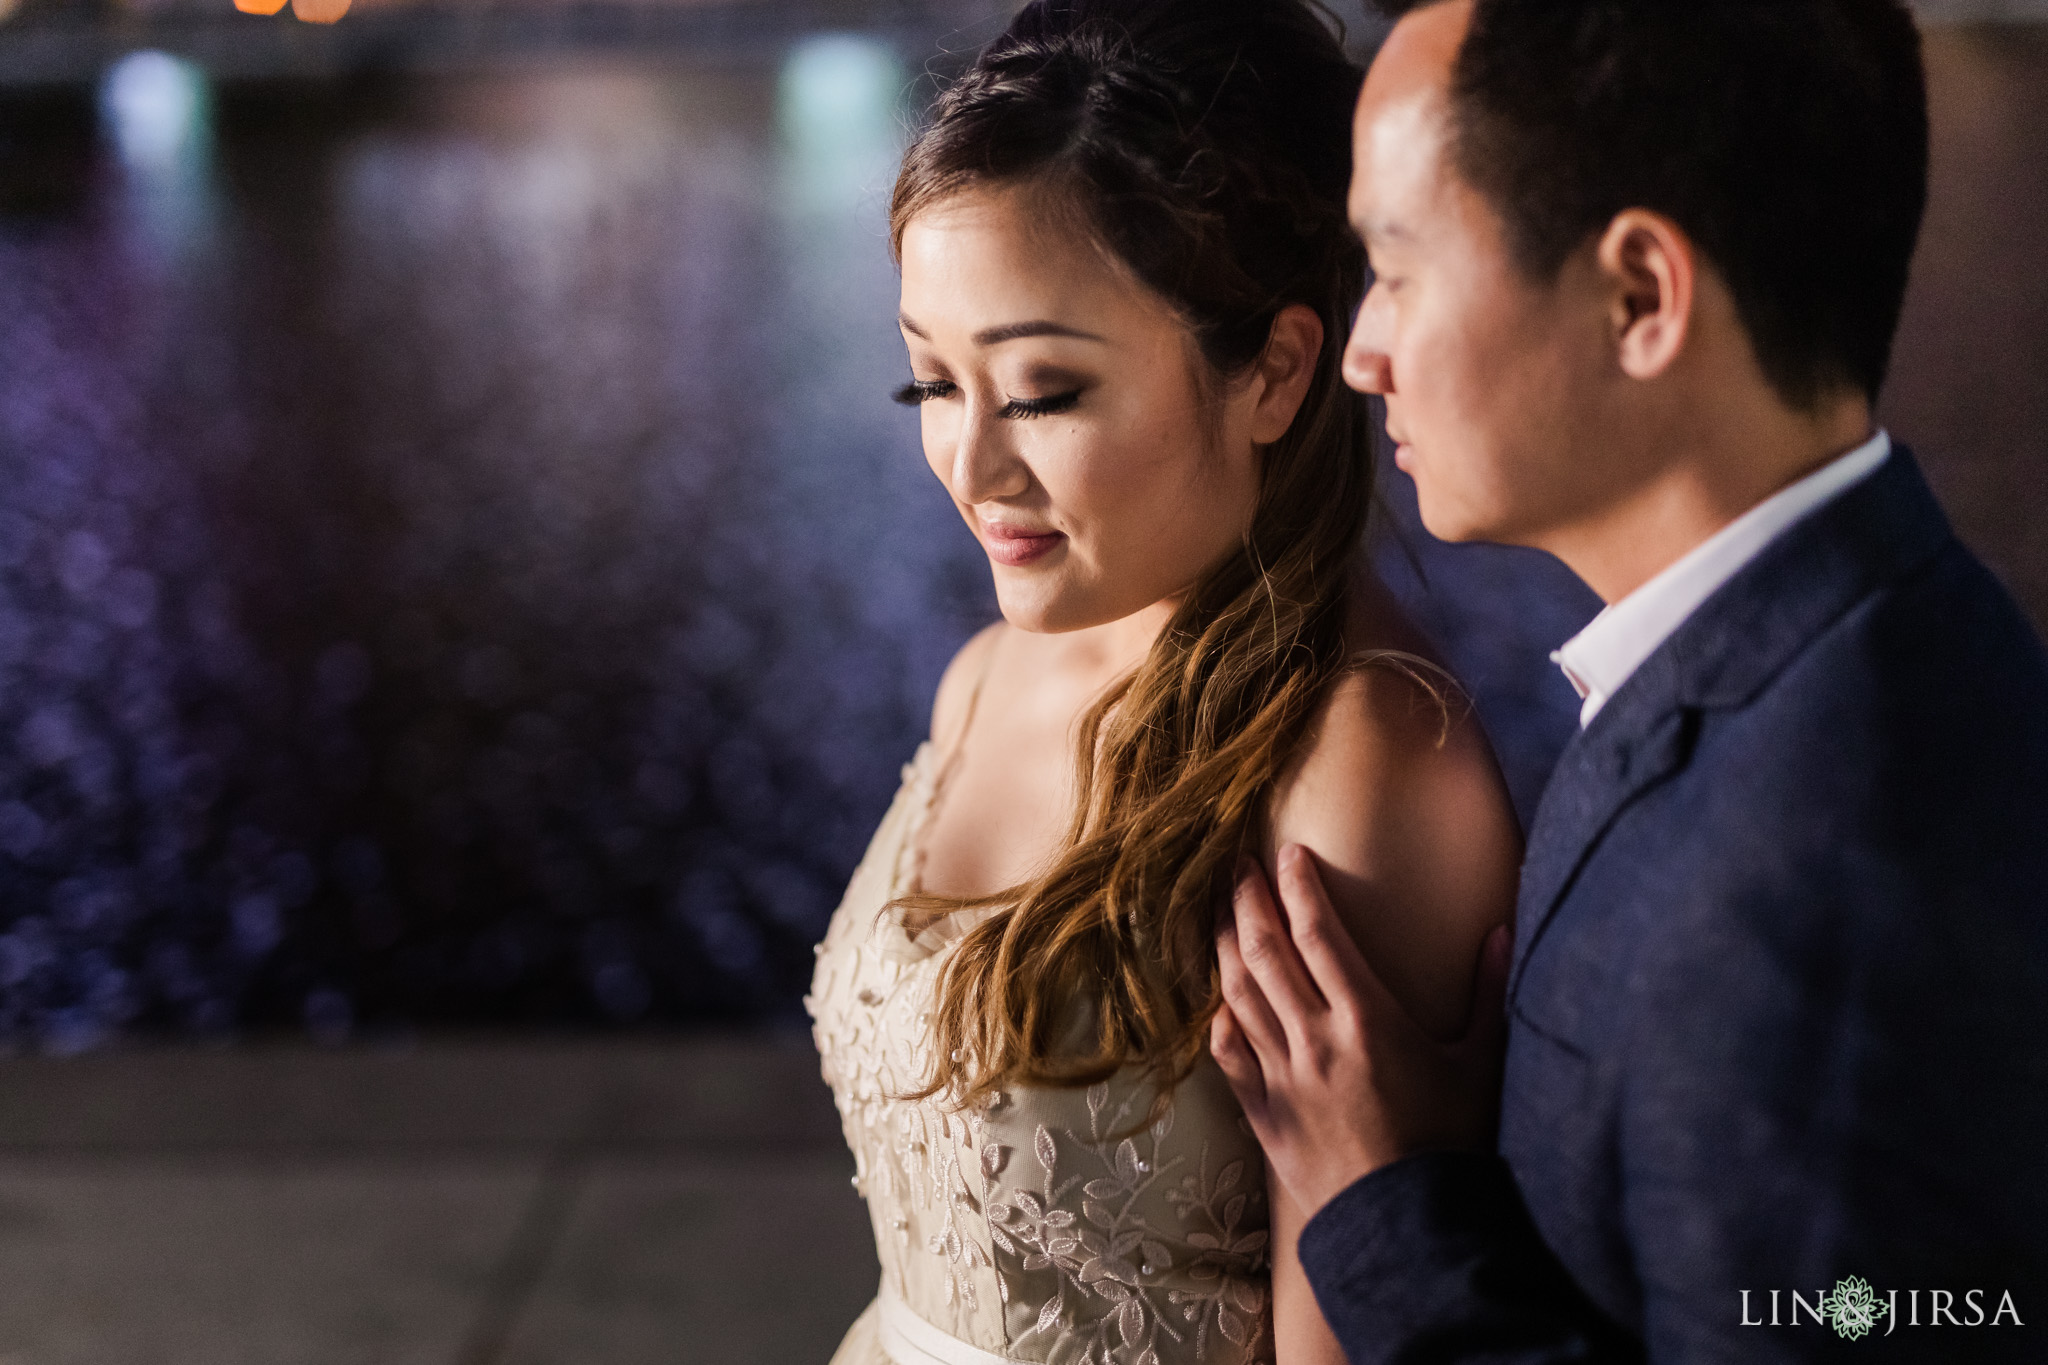 13 Downtown Los Angeles Engagement Photography